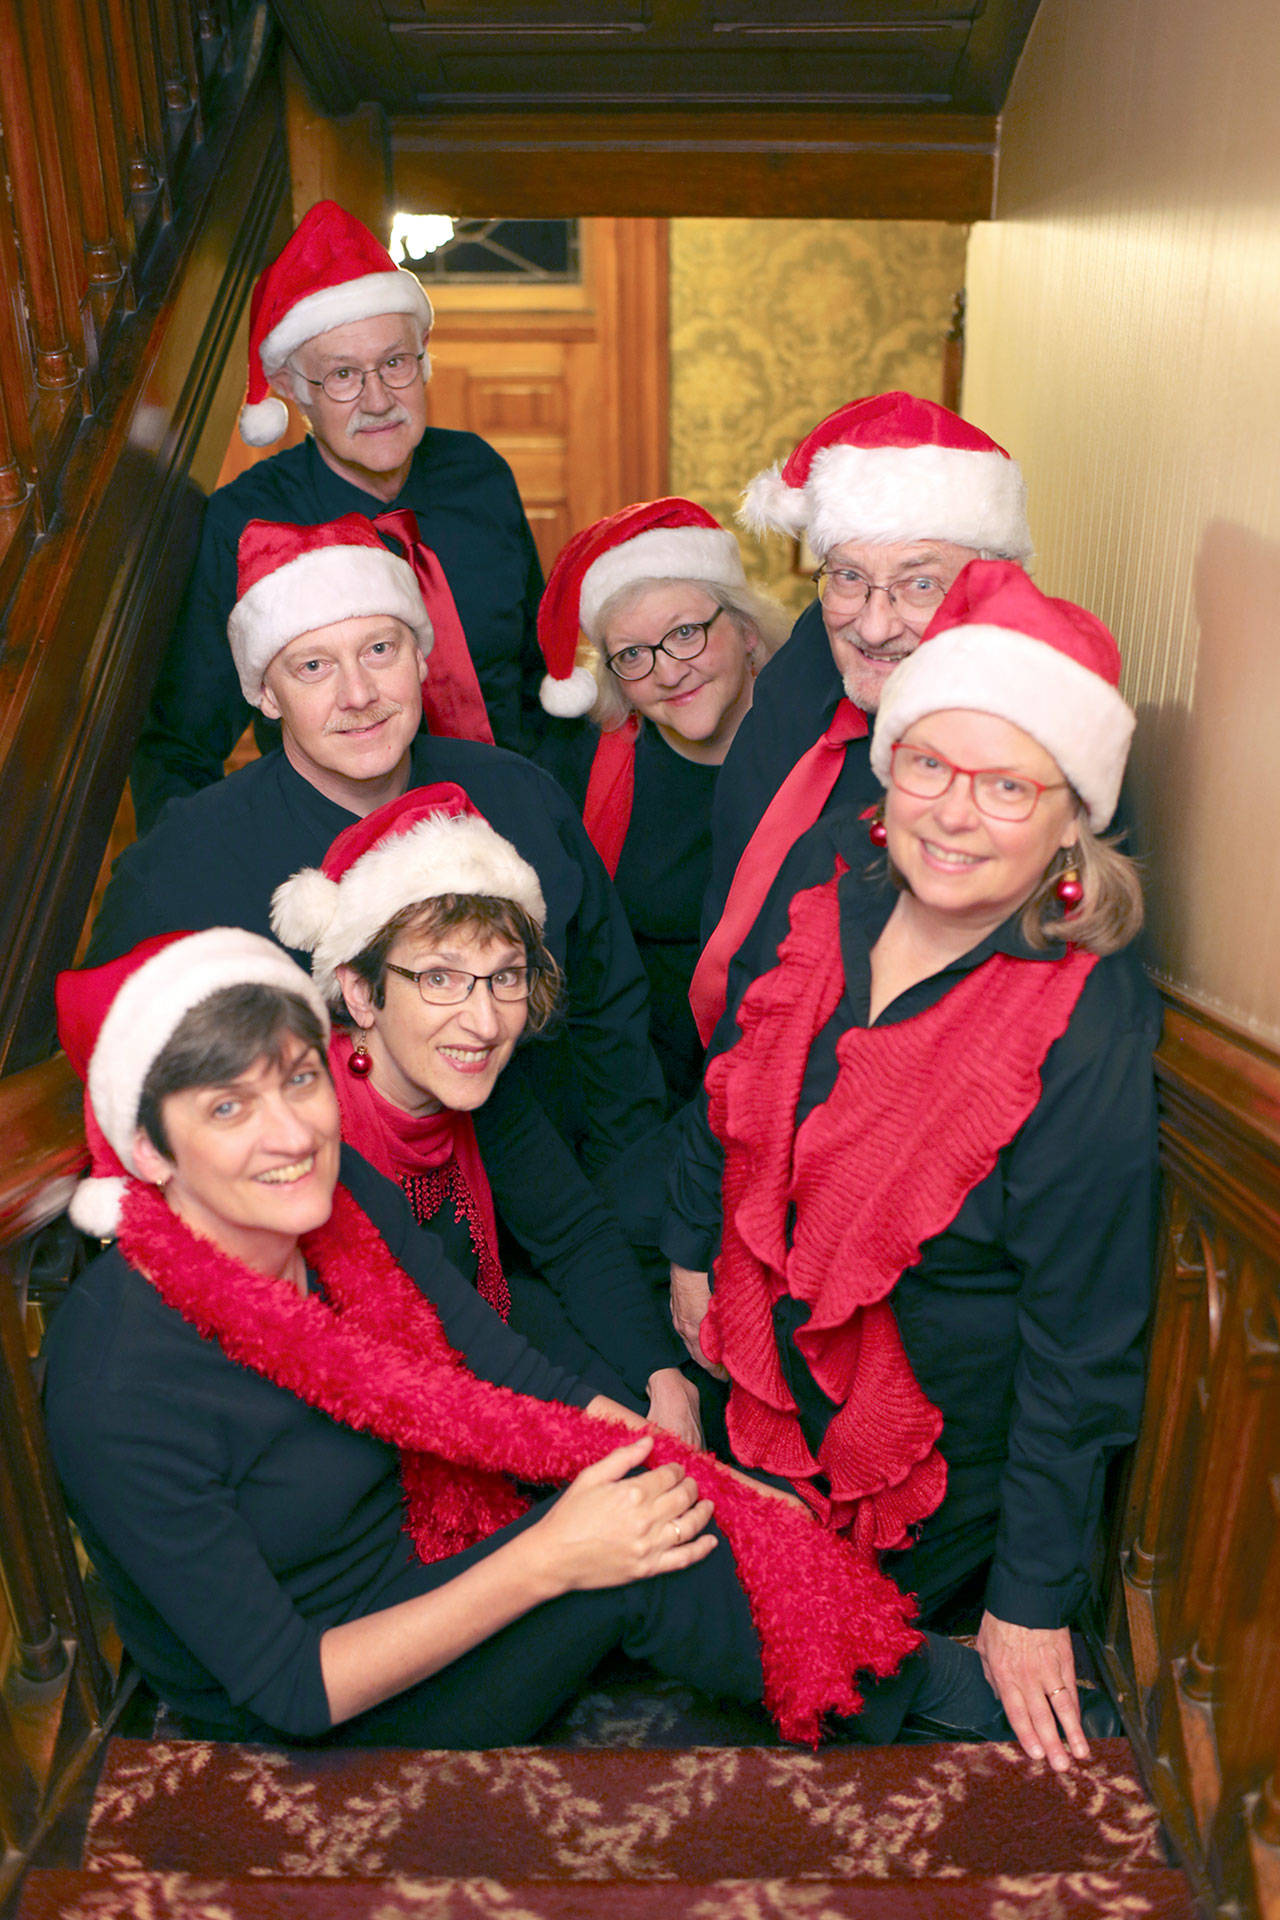 Wild Rose Chorale will host holiday concerts tonight and Sunday at First Presbyterian Church. Singers are (clockwise, from top) Doug Rodgers, Marj Iuro, Al Thompson, Lynn Nowak, Leslie Lewis, JES Schumacher and Charles Helman. (Barney Burke)